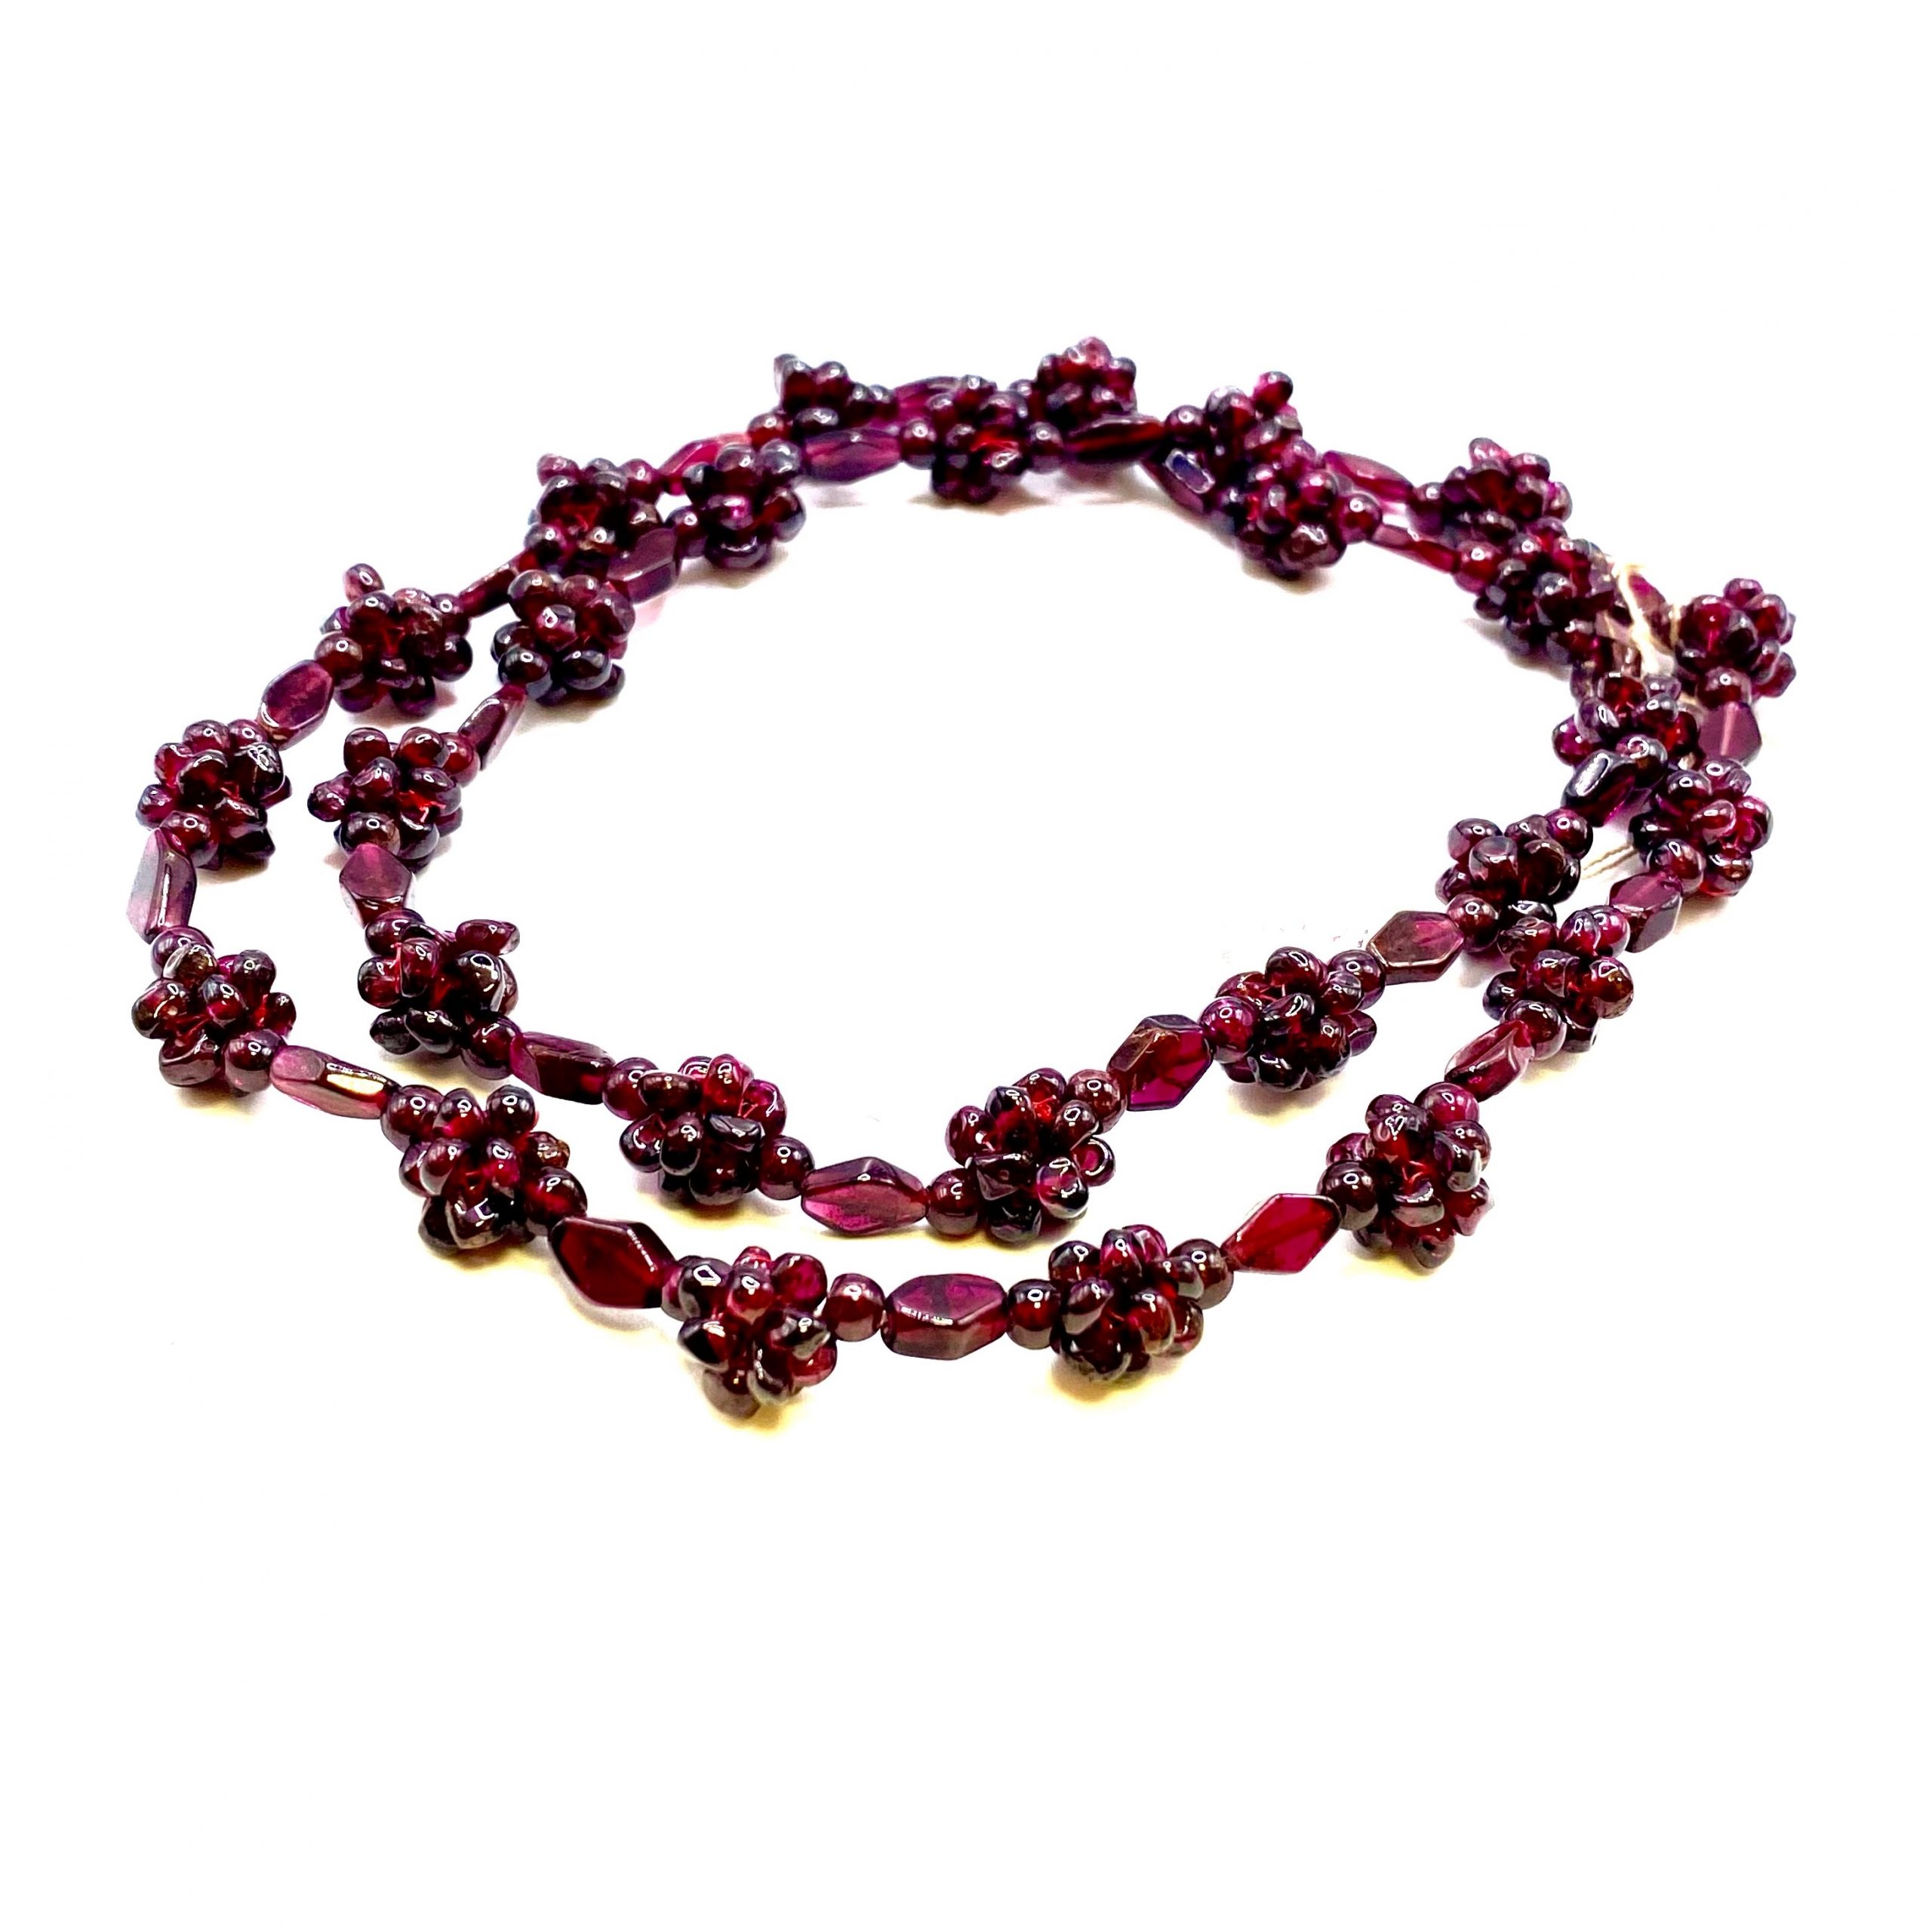 Red garnet pebble beads necklace